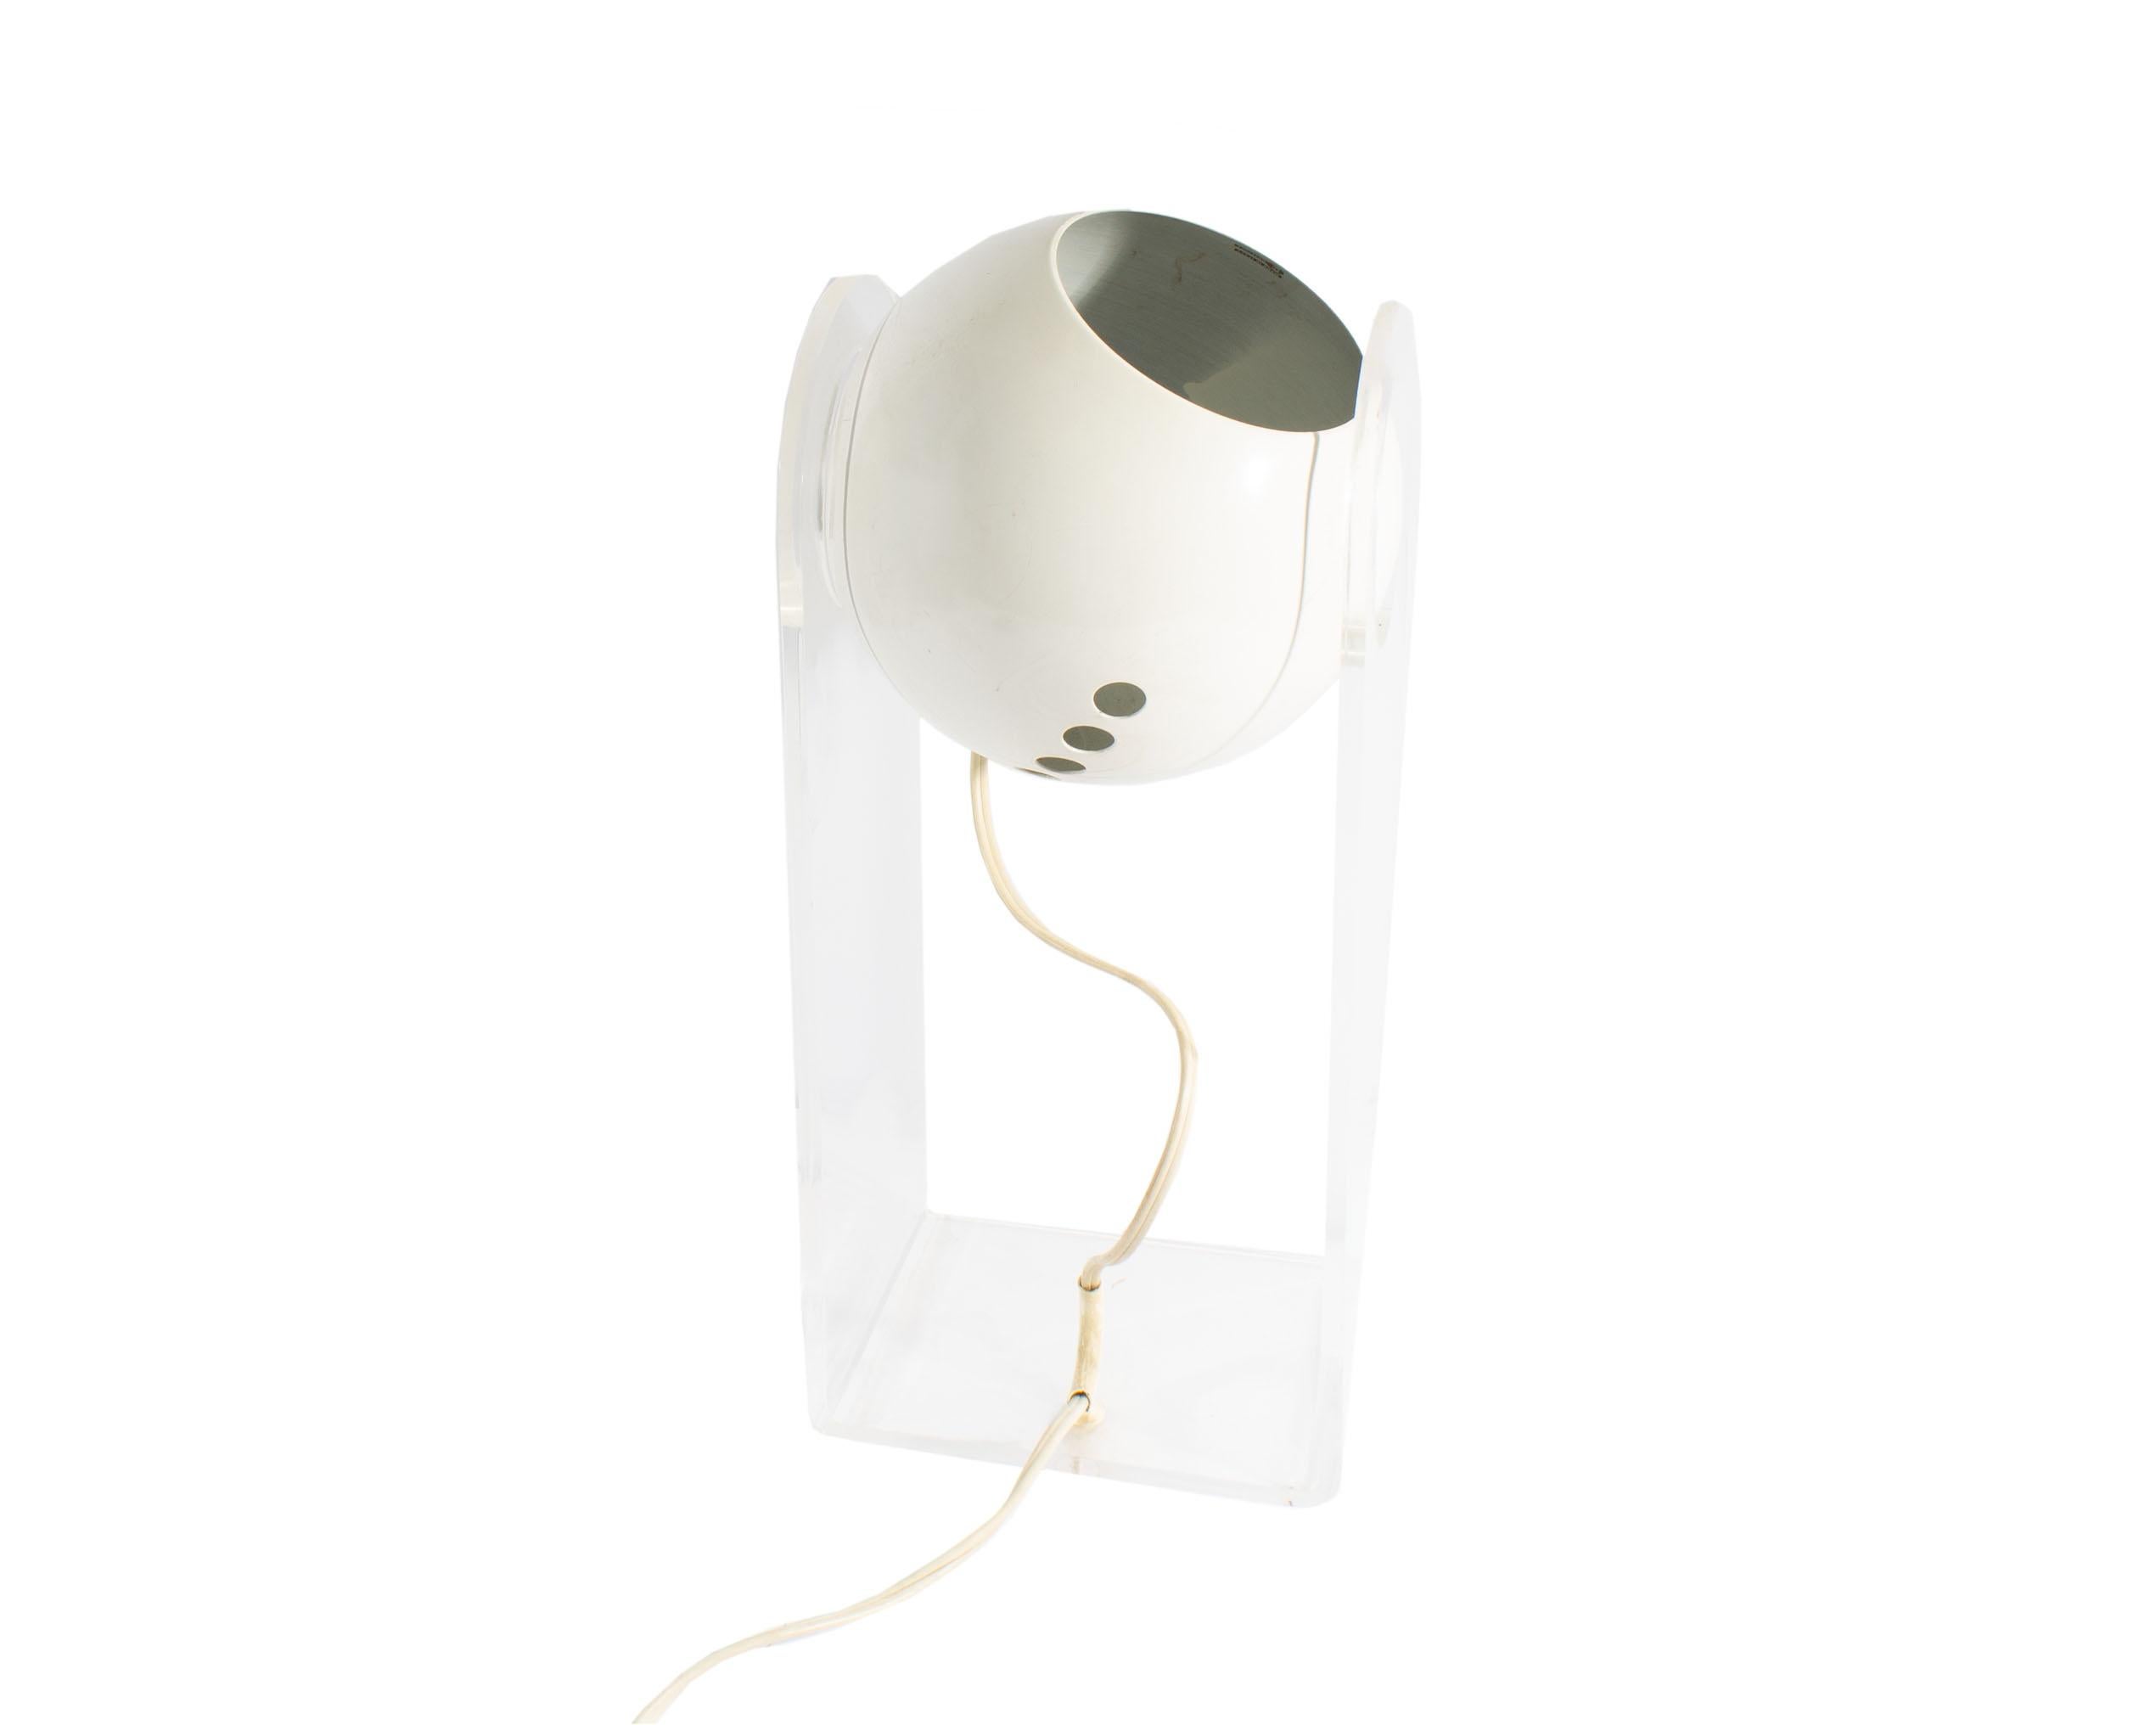 A 1968 model 540/G designed by the Italian designer Gino Sarfatti (1912-1985) for Arteluce. Made in Italy, this lamp features a clear acrylic stand that holds a white round 